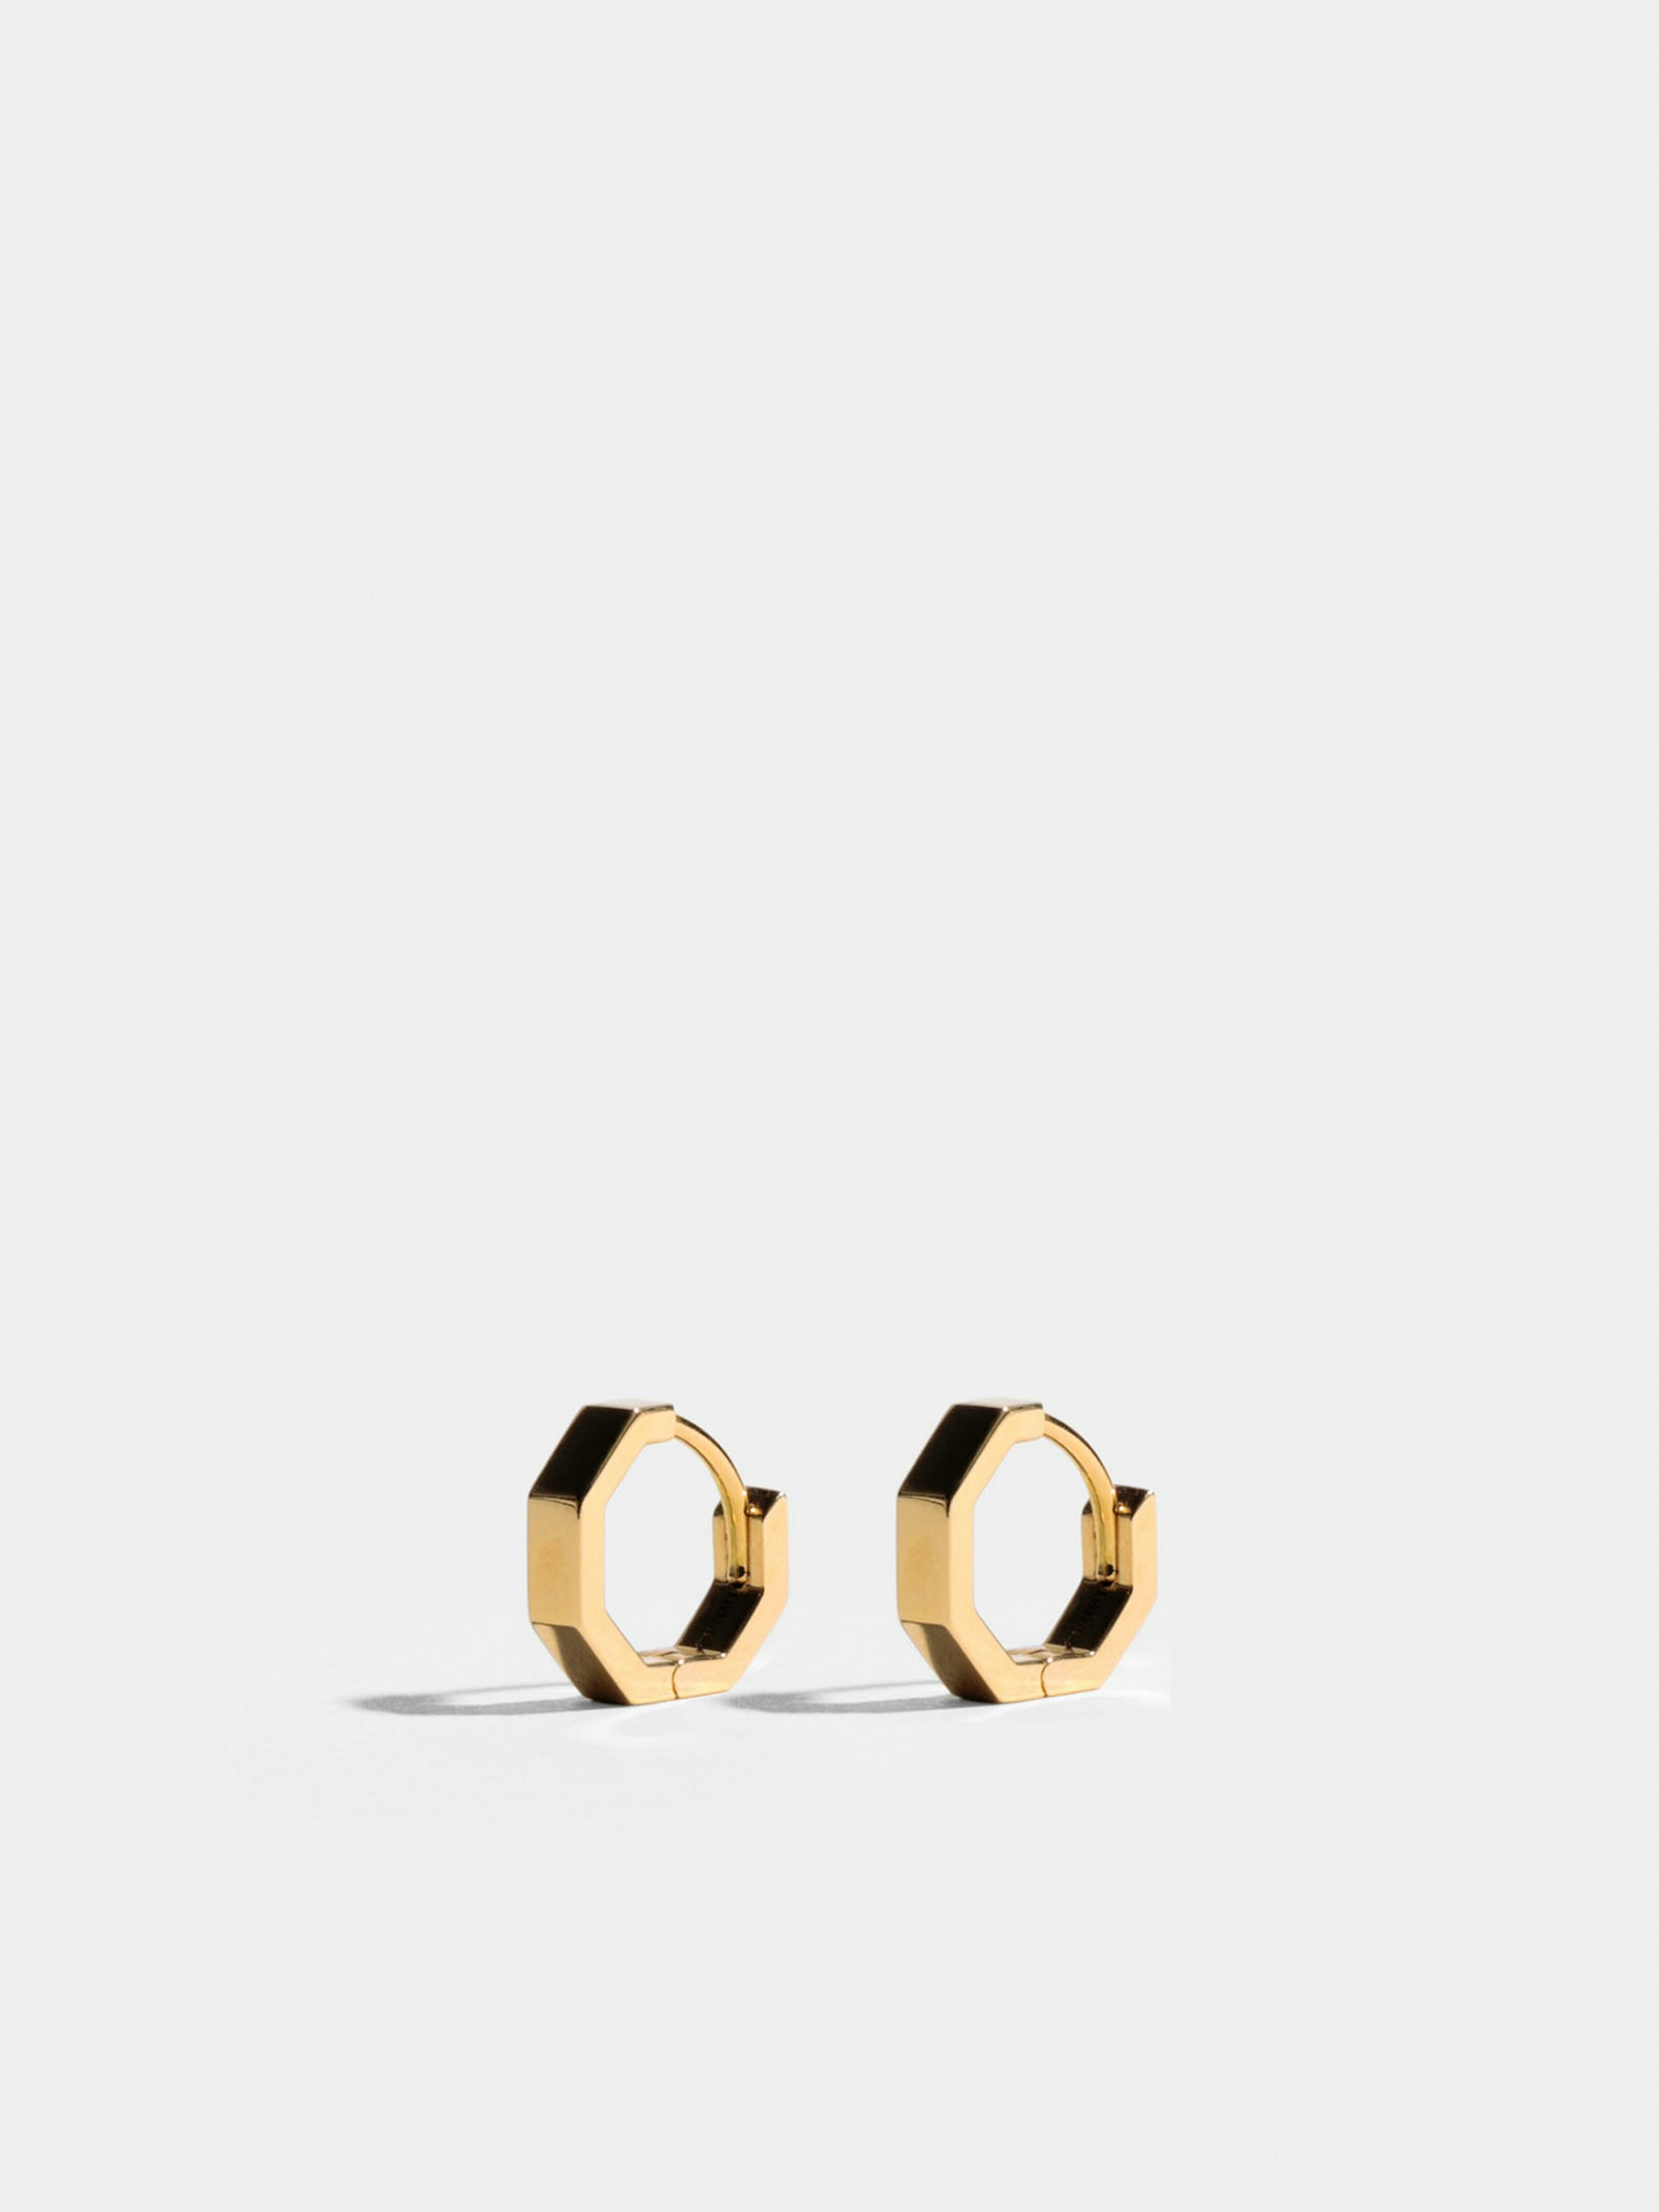 Octogone 10mm earrings in 18k Fairmined ethical yellow gold, the pair.